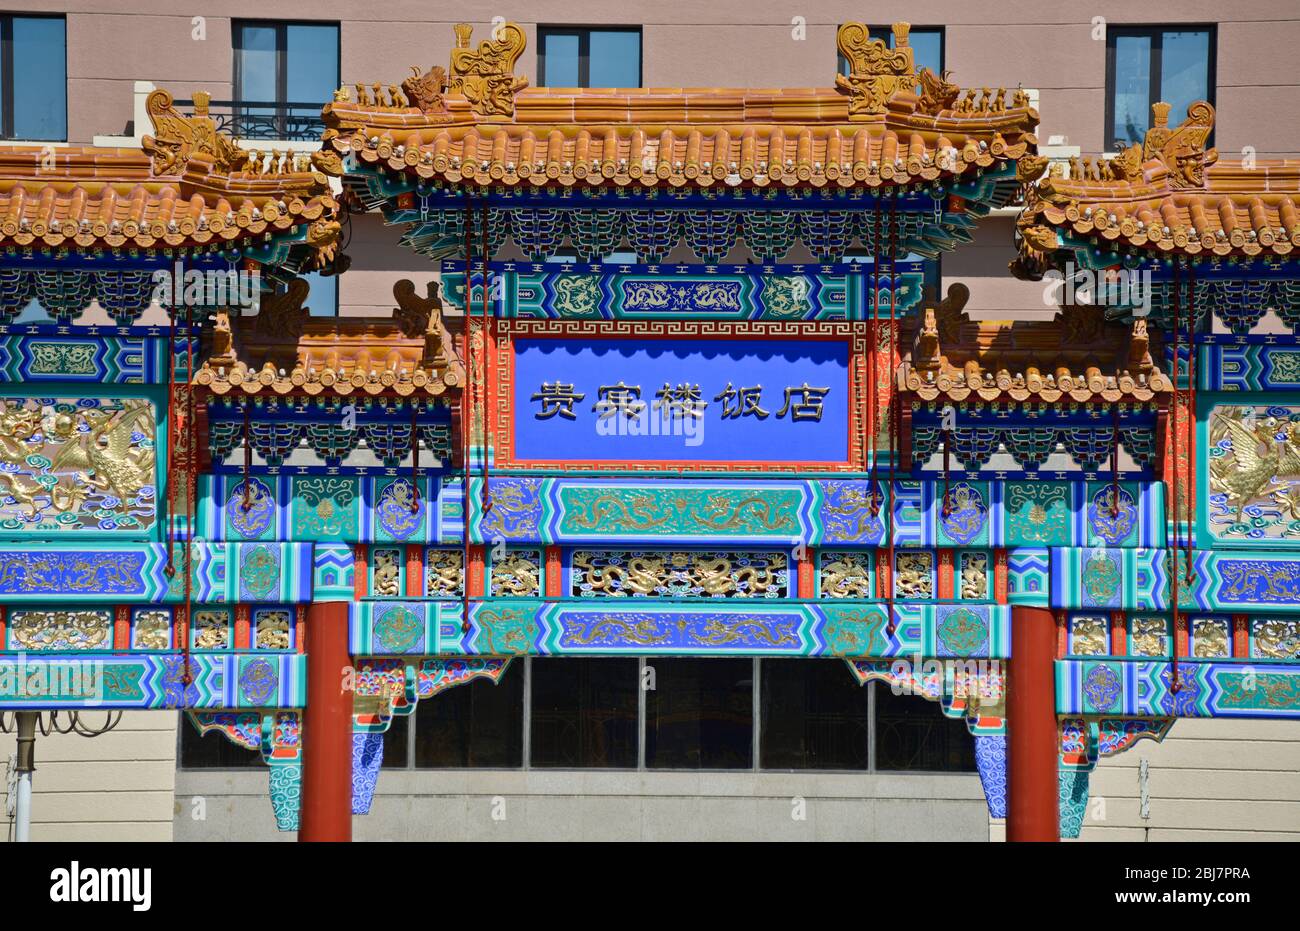 Traditional chinese archway in front of a modern building. Qianmen East Street, Beijing. China Stock Photo